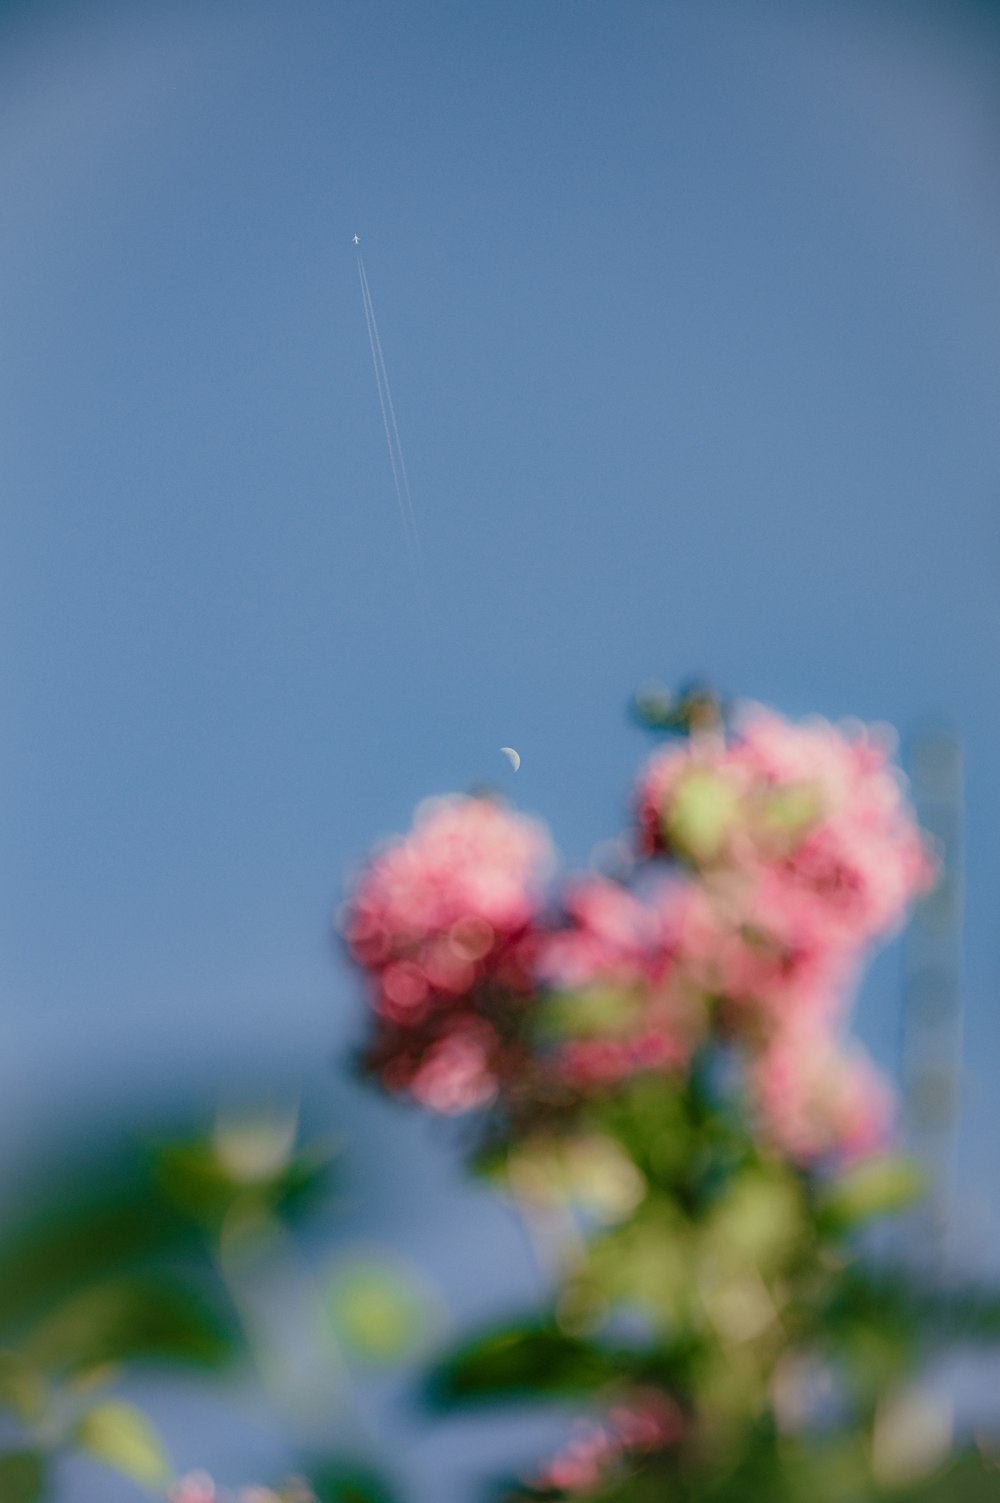 a blurry photo of pink flowers with a jet in the background